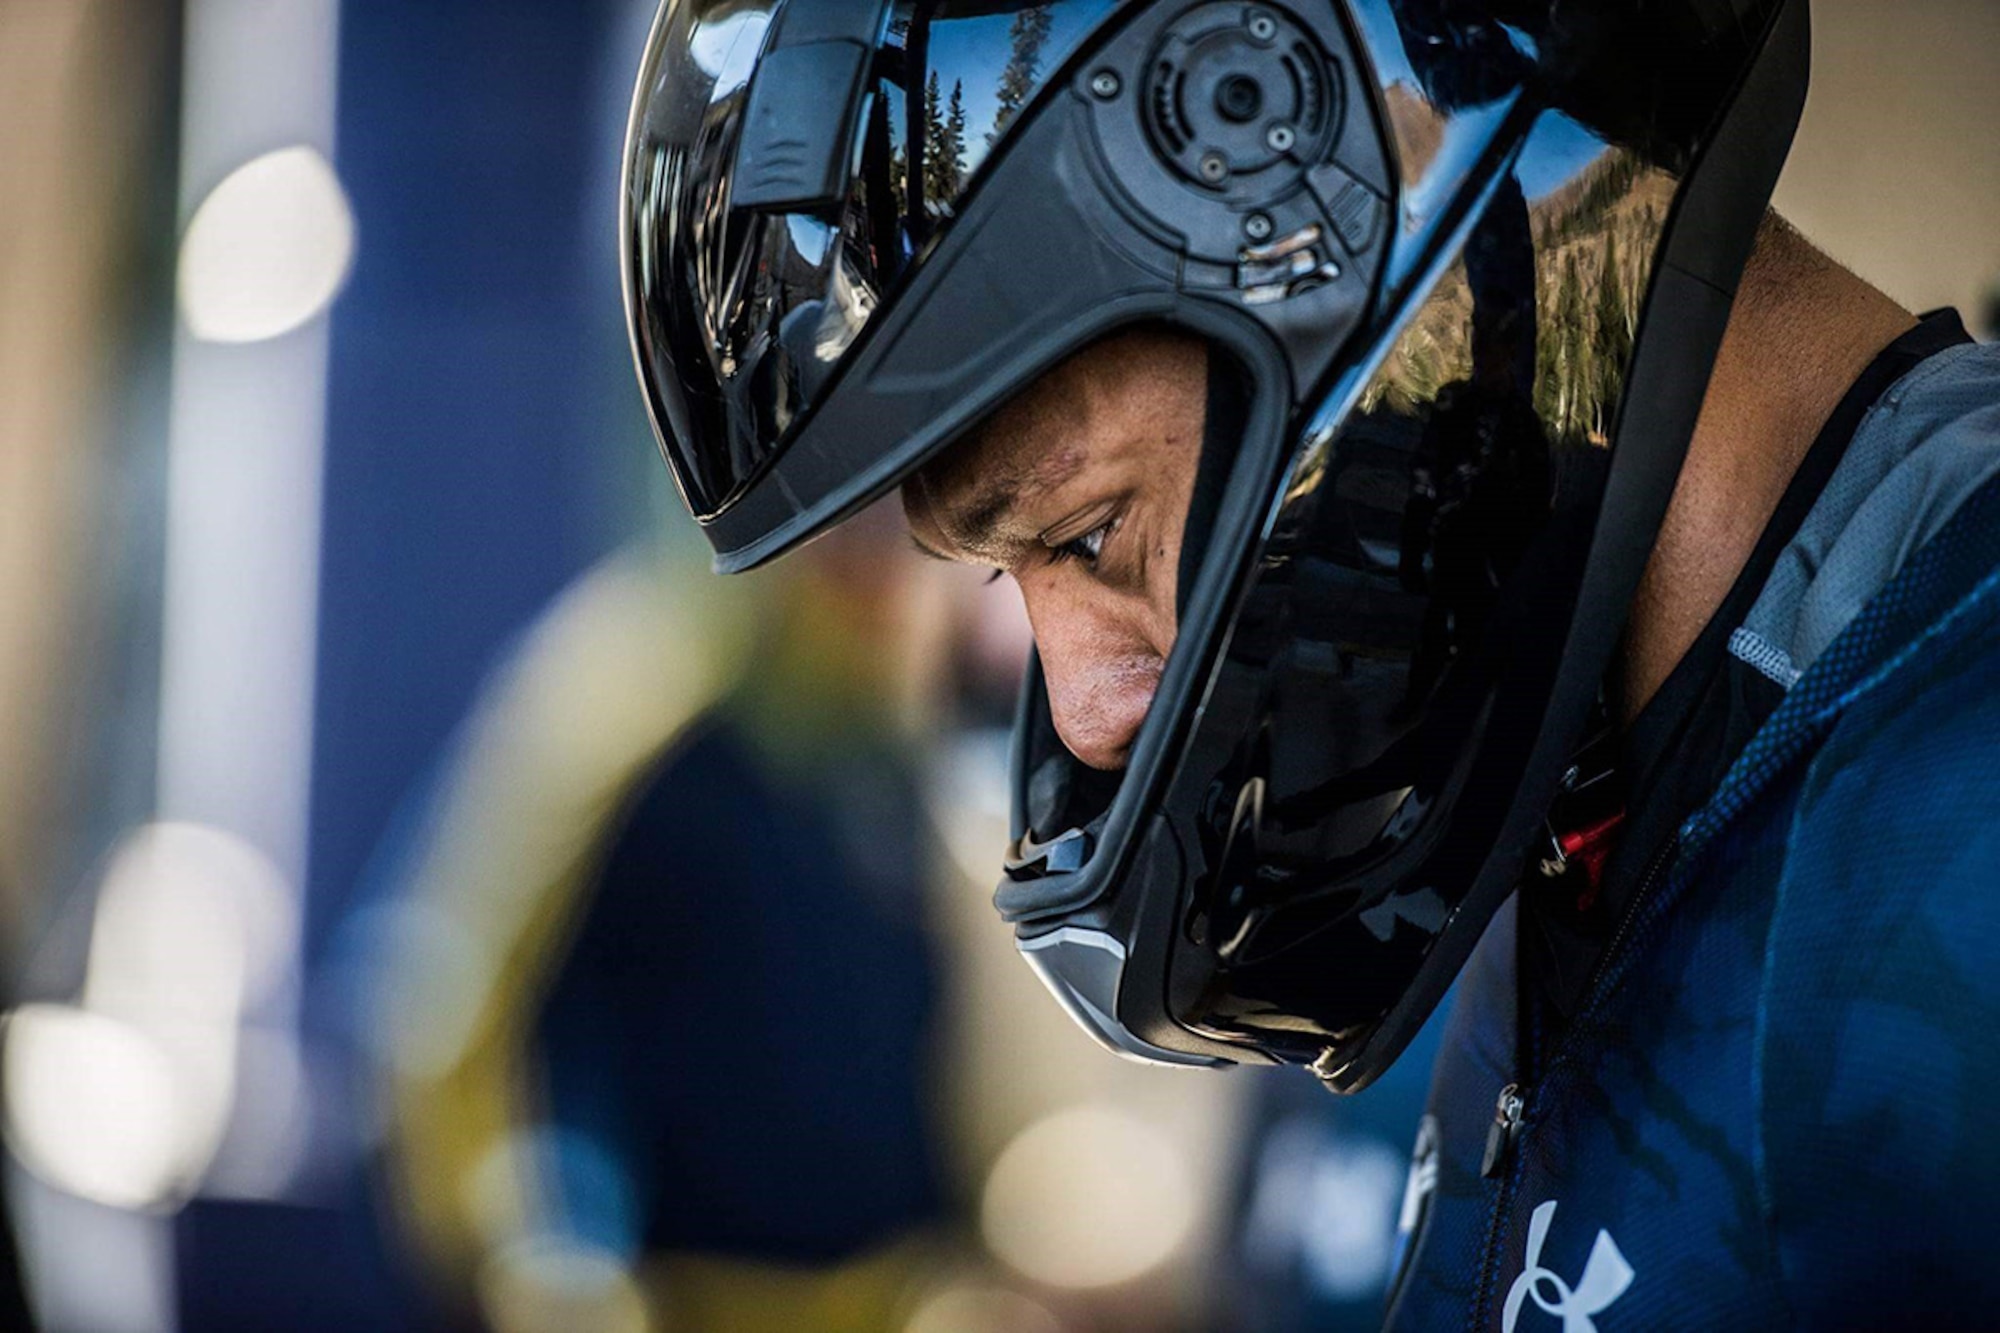 U.S. Air Force Capt. David Simon takes a moment to focus during tryouts for the U.S. National Bobsled Team in Park City, Utah, on Nov. 2, 2016. His bid for that team ended with an injury, but he's still ultimately aiming for a spot on the U.S.A. Bobsled Team for the 2018 Winter Olympic Games in Pyeongchang, Republic of Korea. (Courtesy photo)